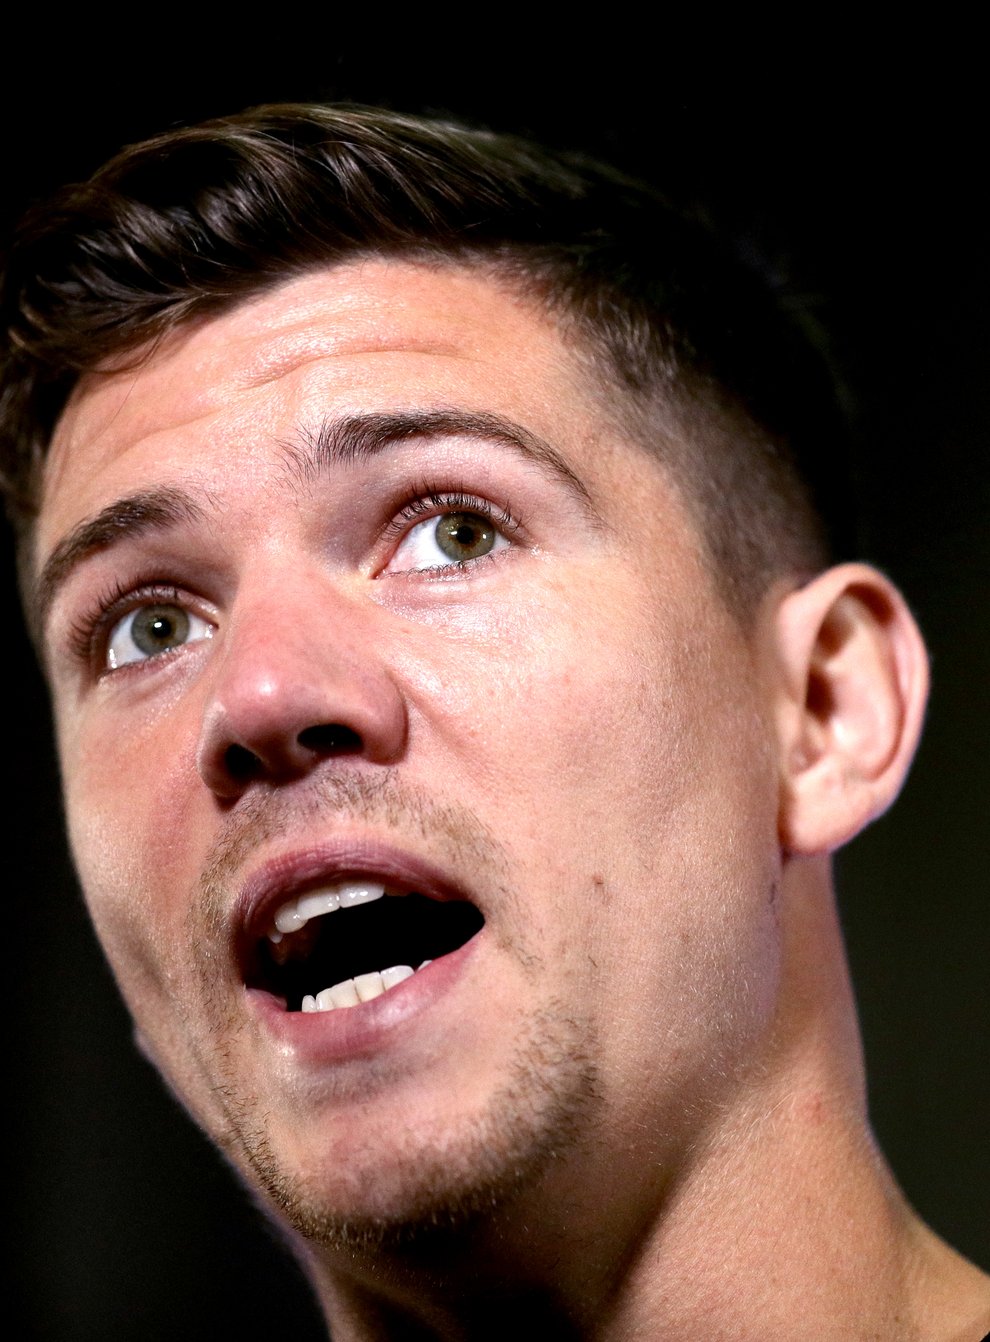 Luke Campbell speaks at a press conference